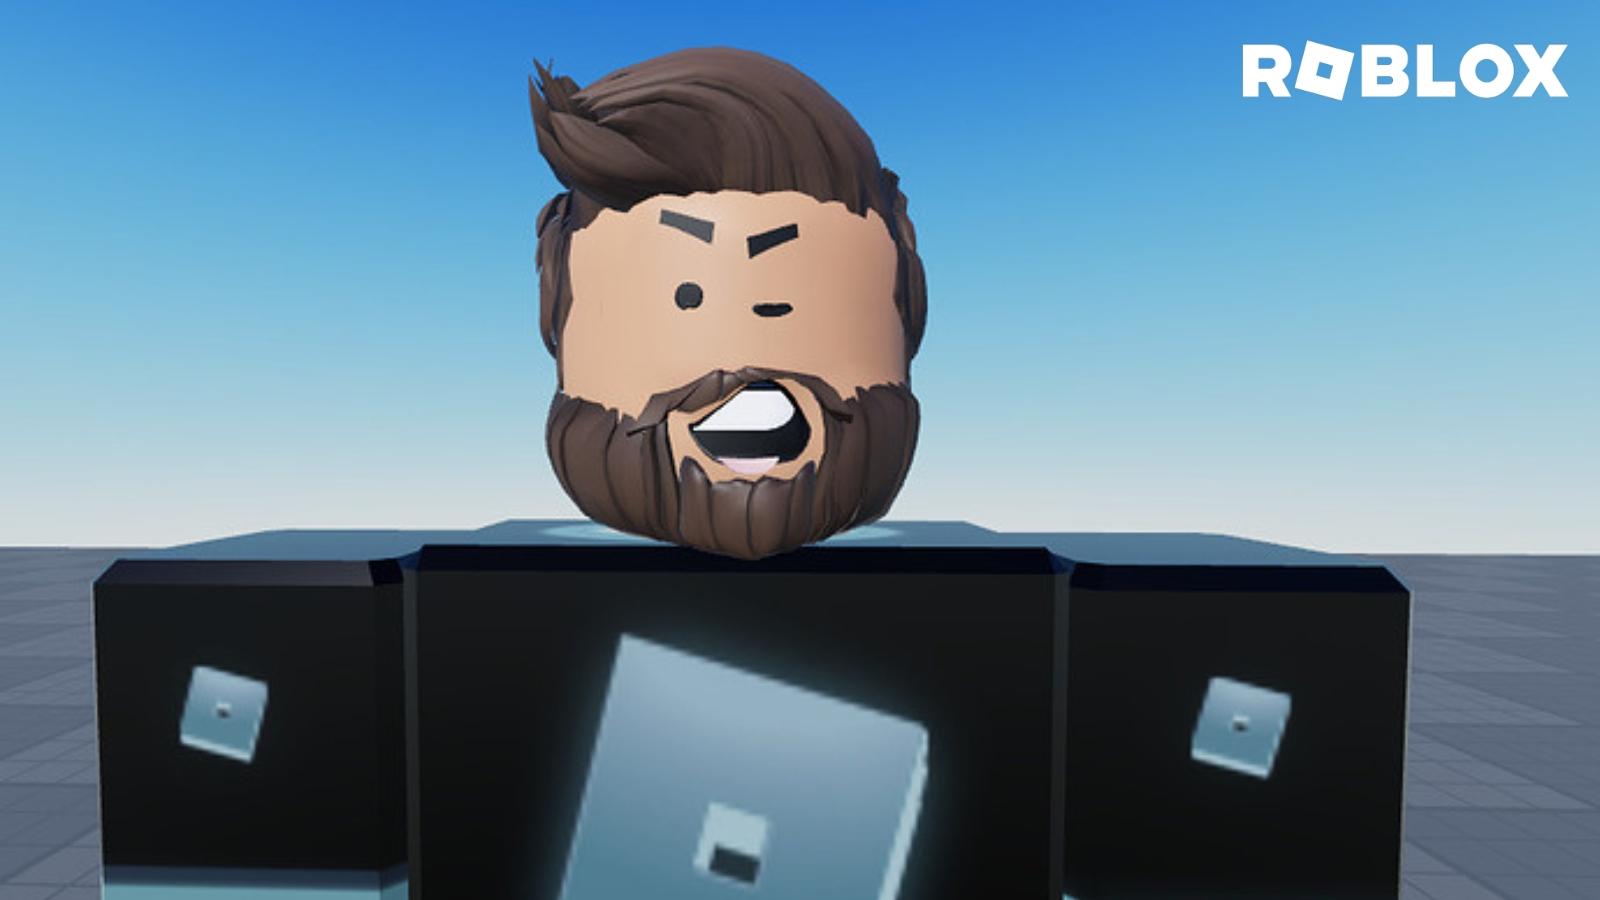 Roblox Classic Head loads in a different Head in Game and on